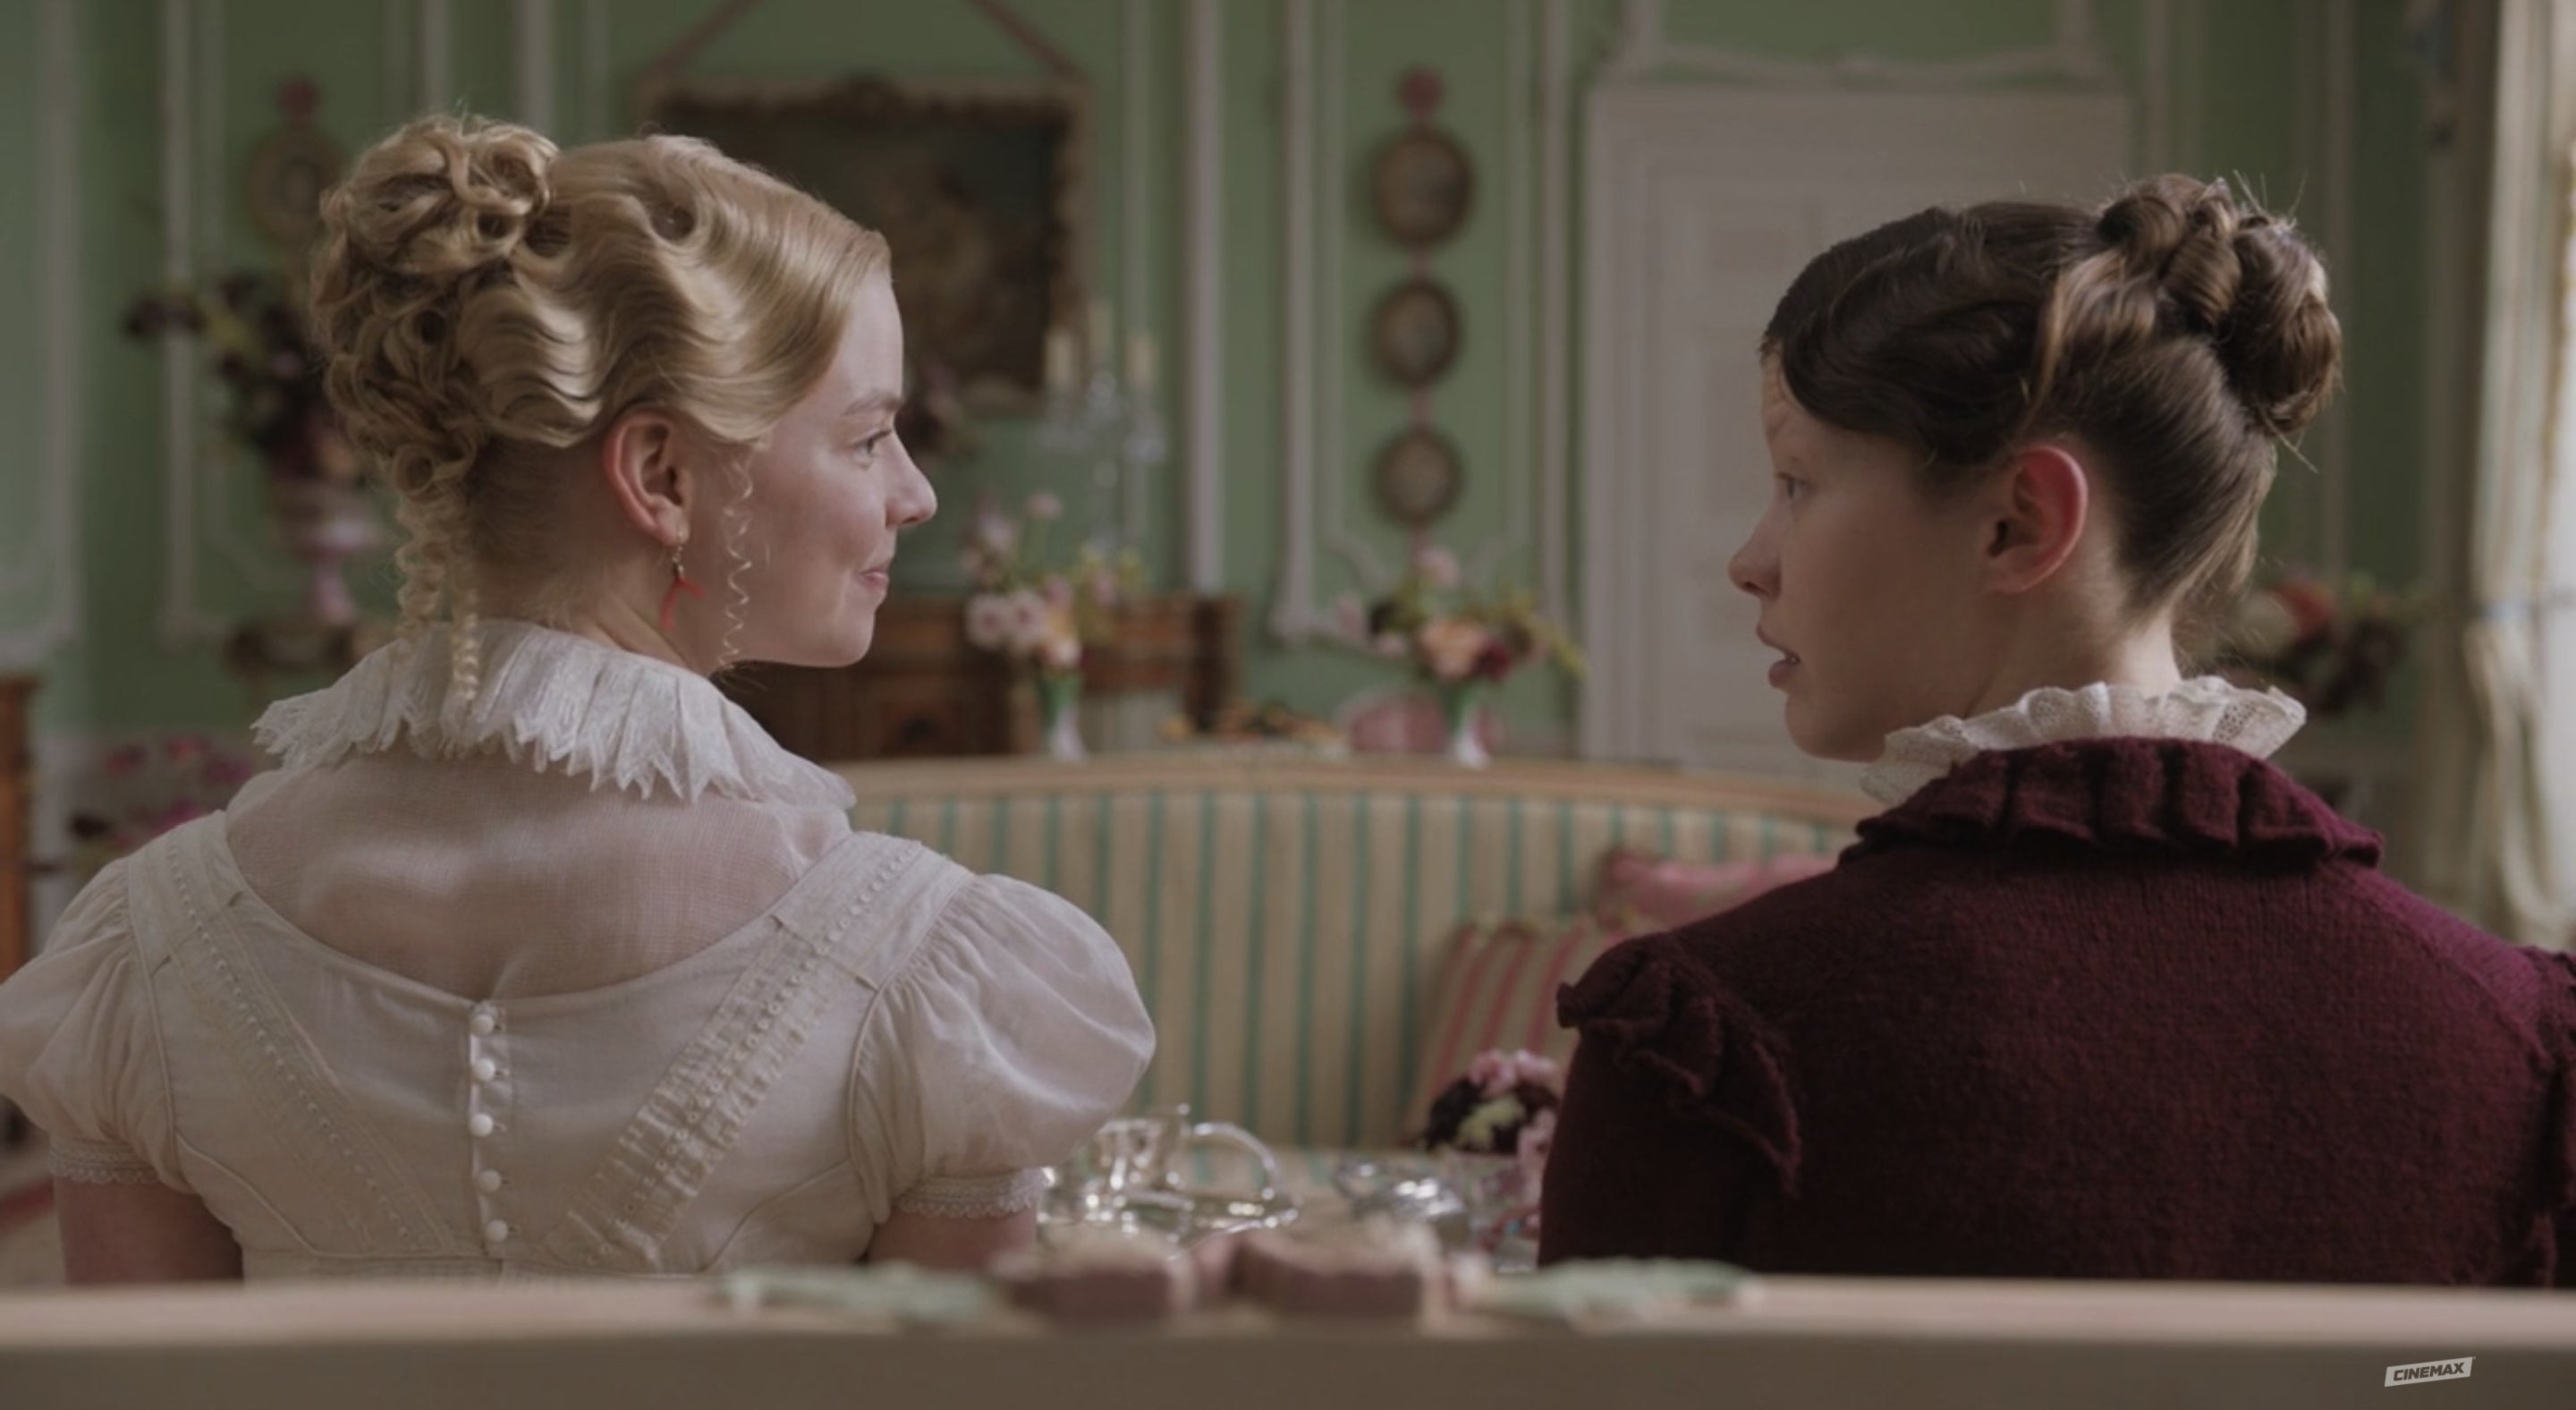 Emma and Harriet turn and face in other in conversation